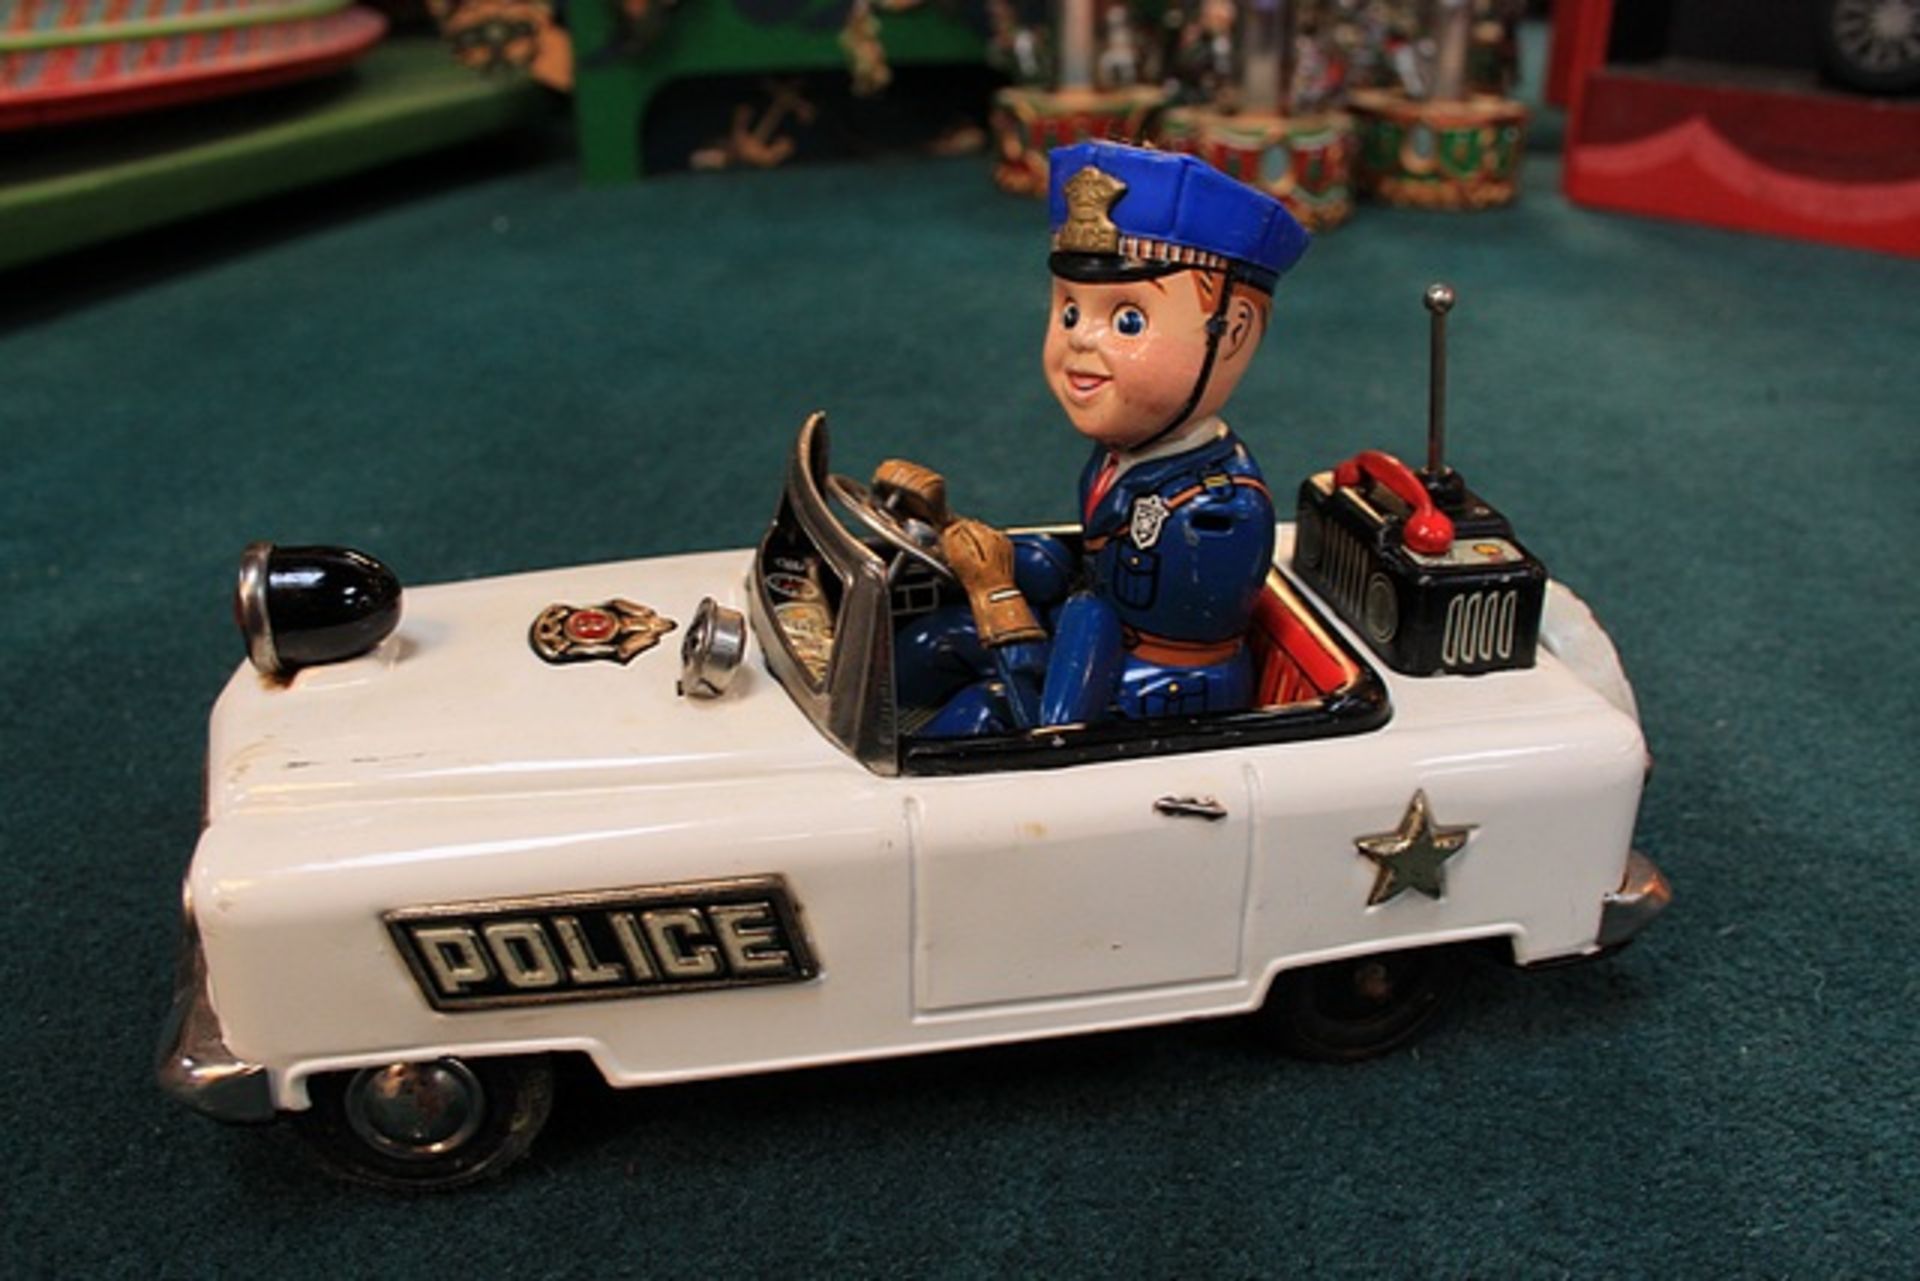 T.N Nomura (Japan) Battery Powered Mystery Police Car With Automatic Steering Changes Direction - Image 2 of 3